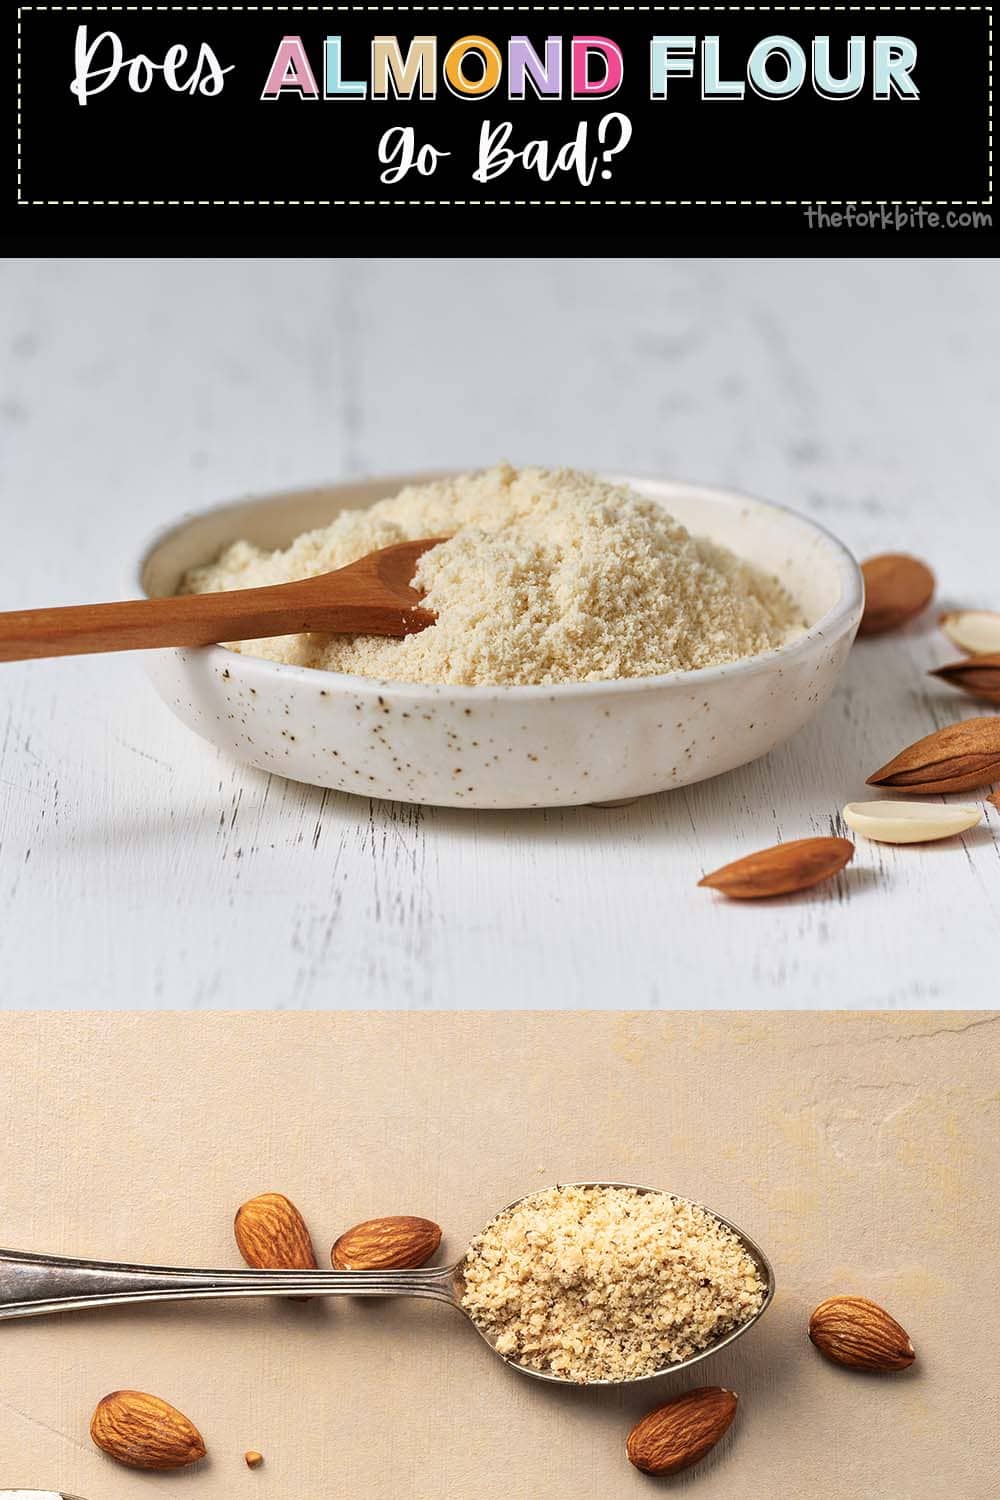 Almond flour is made from nuts, and nuts have a high oil content. It makes them prone to spoiling, which can happen easily once they've been ground and exposed to oxygen.